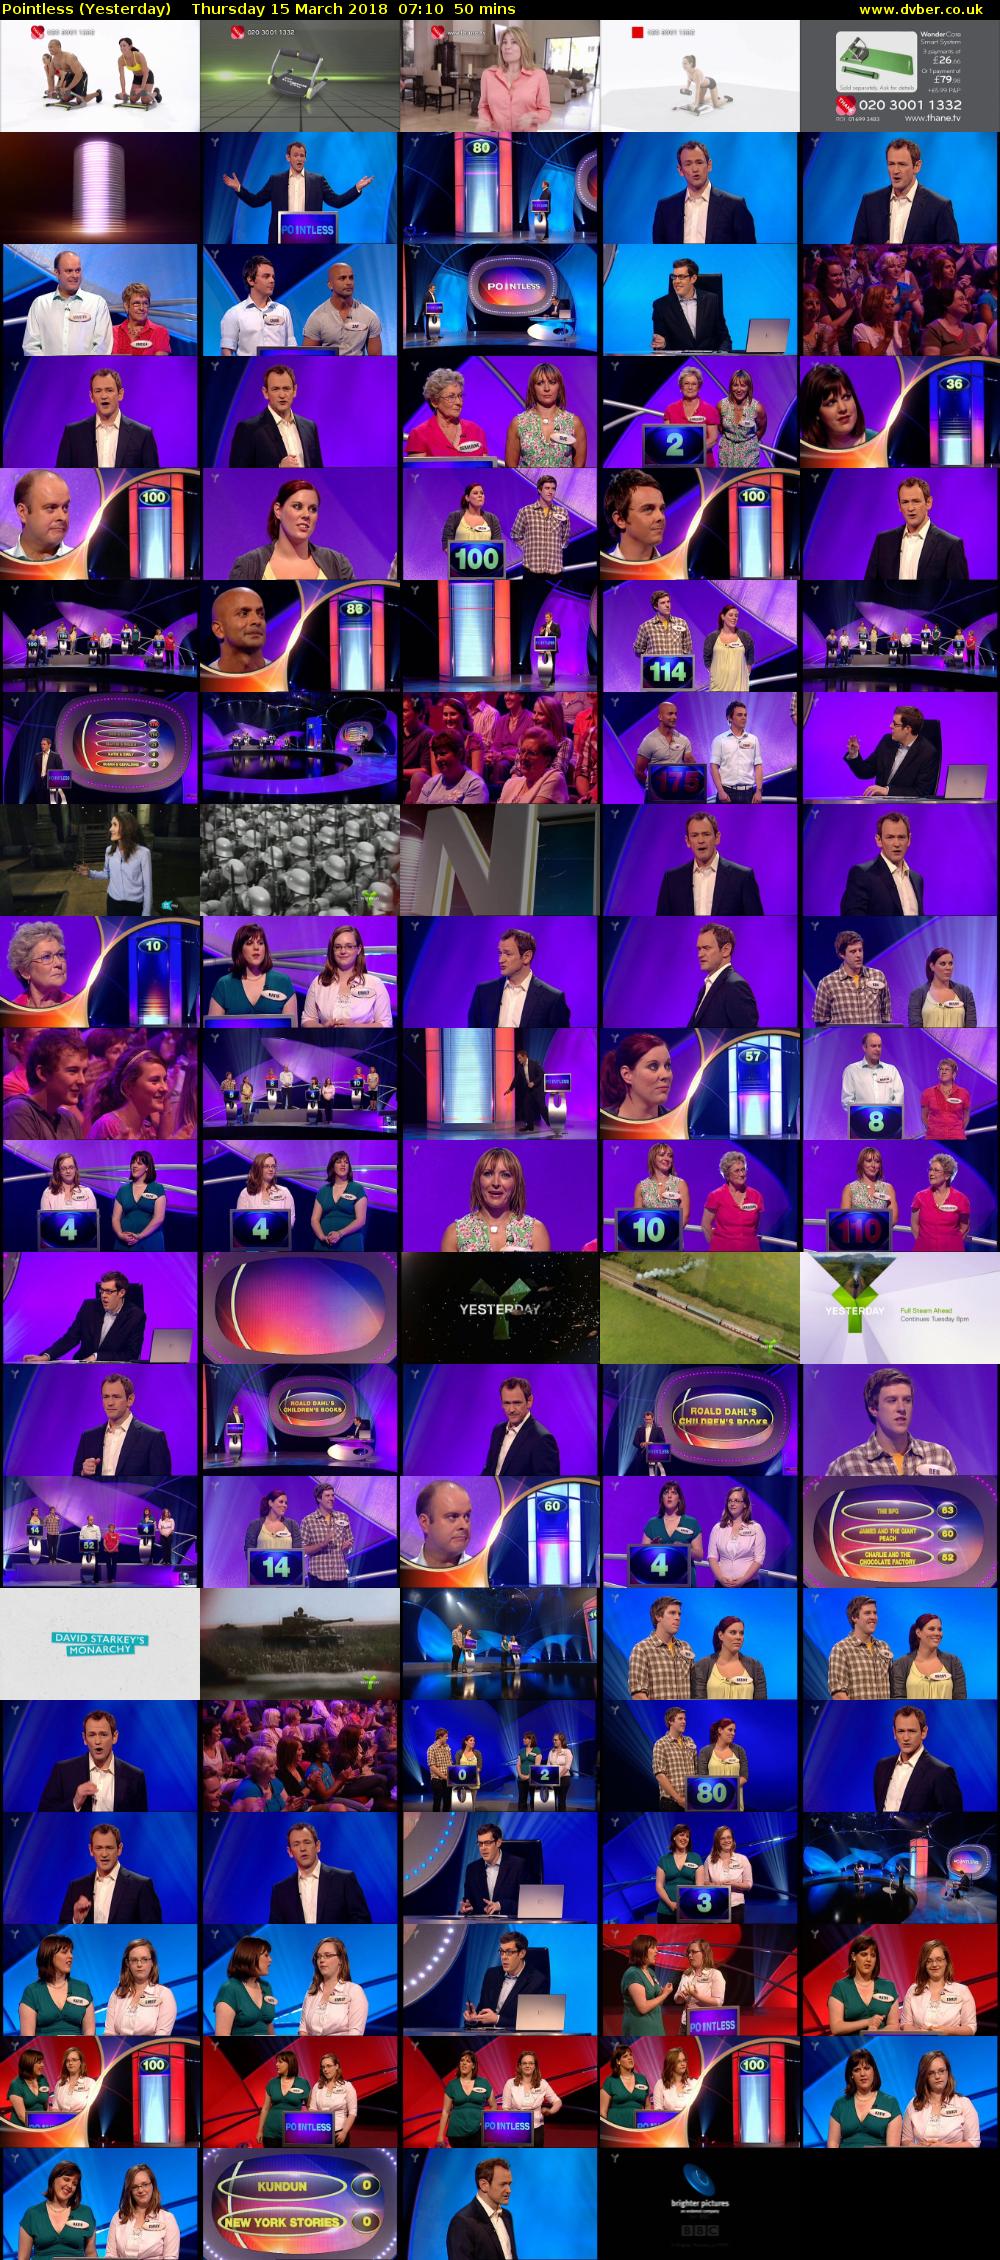 Pointless (Yesterday) Thursday 15 March 2018 07:10 - 08:00